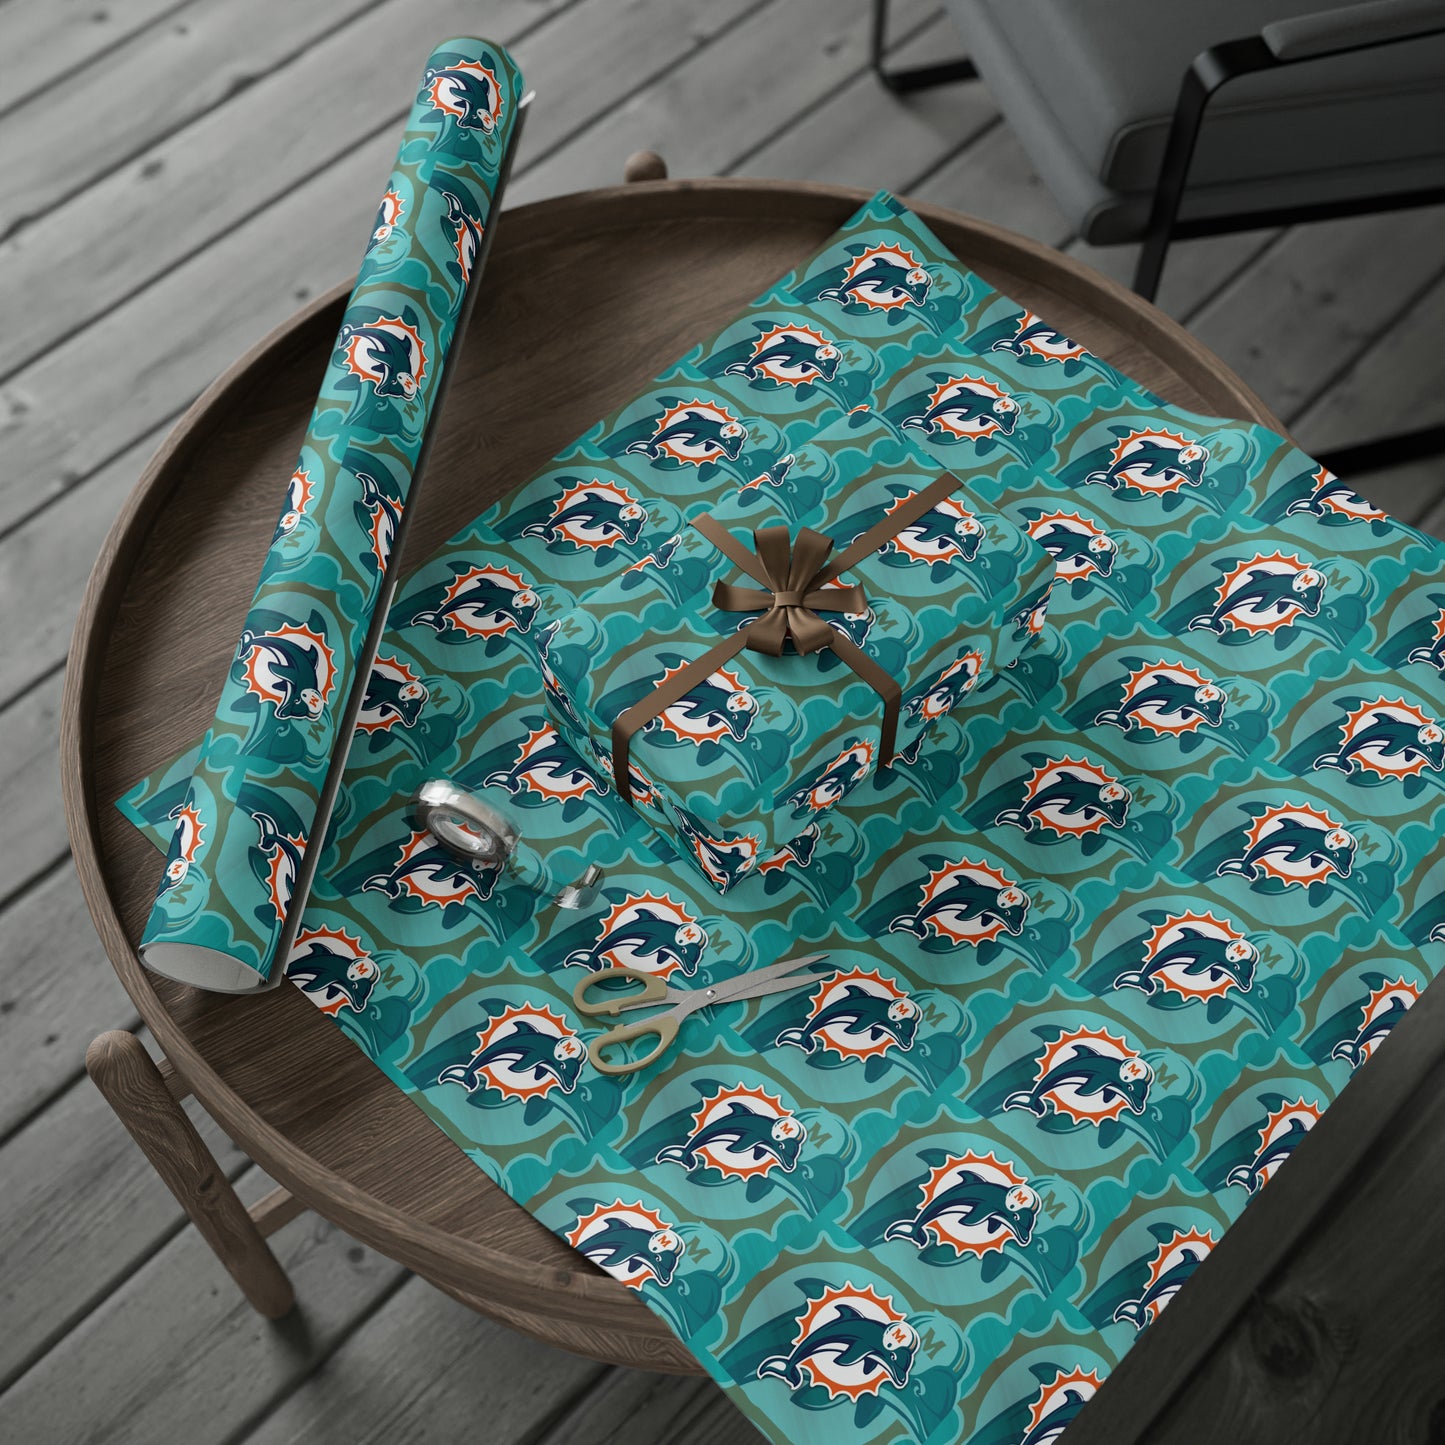 Miami Dolphins Logo NFL Football Birthday Gift Wrapping Paper Holiday